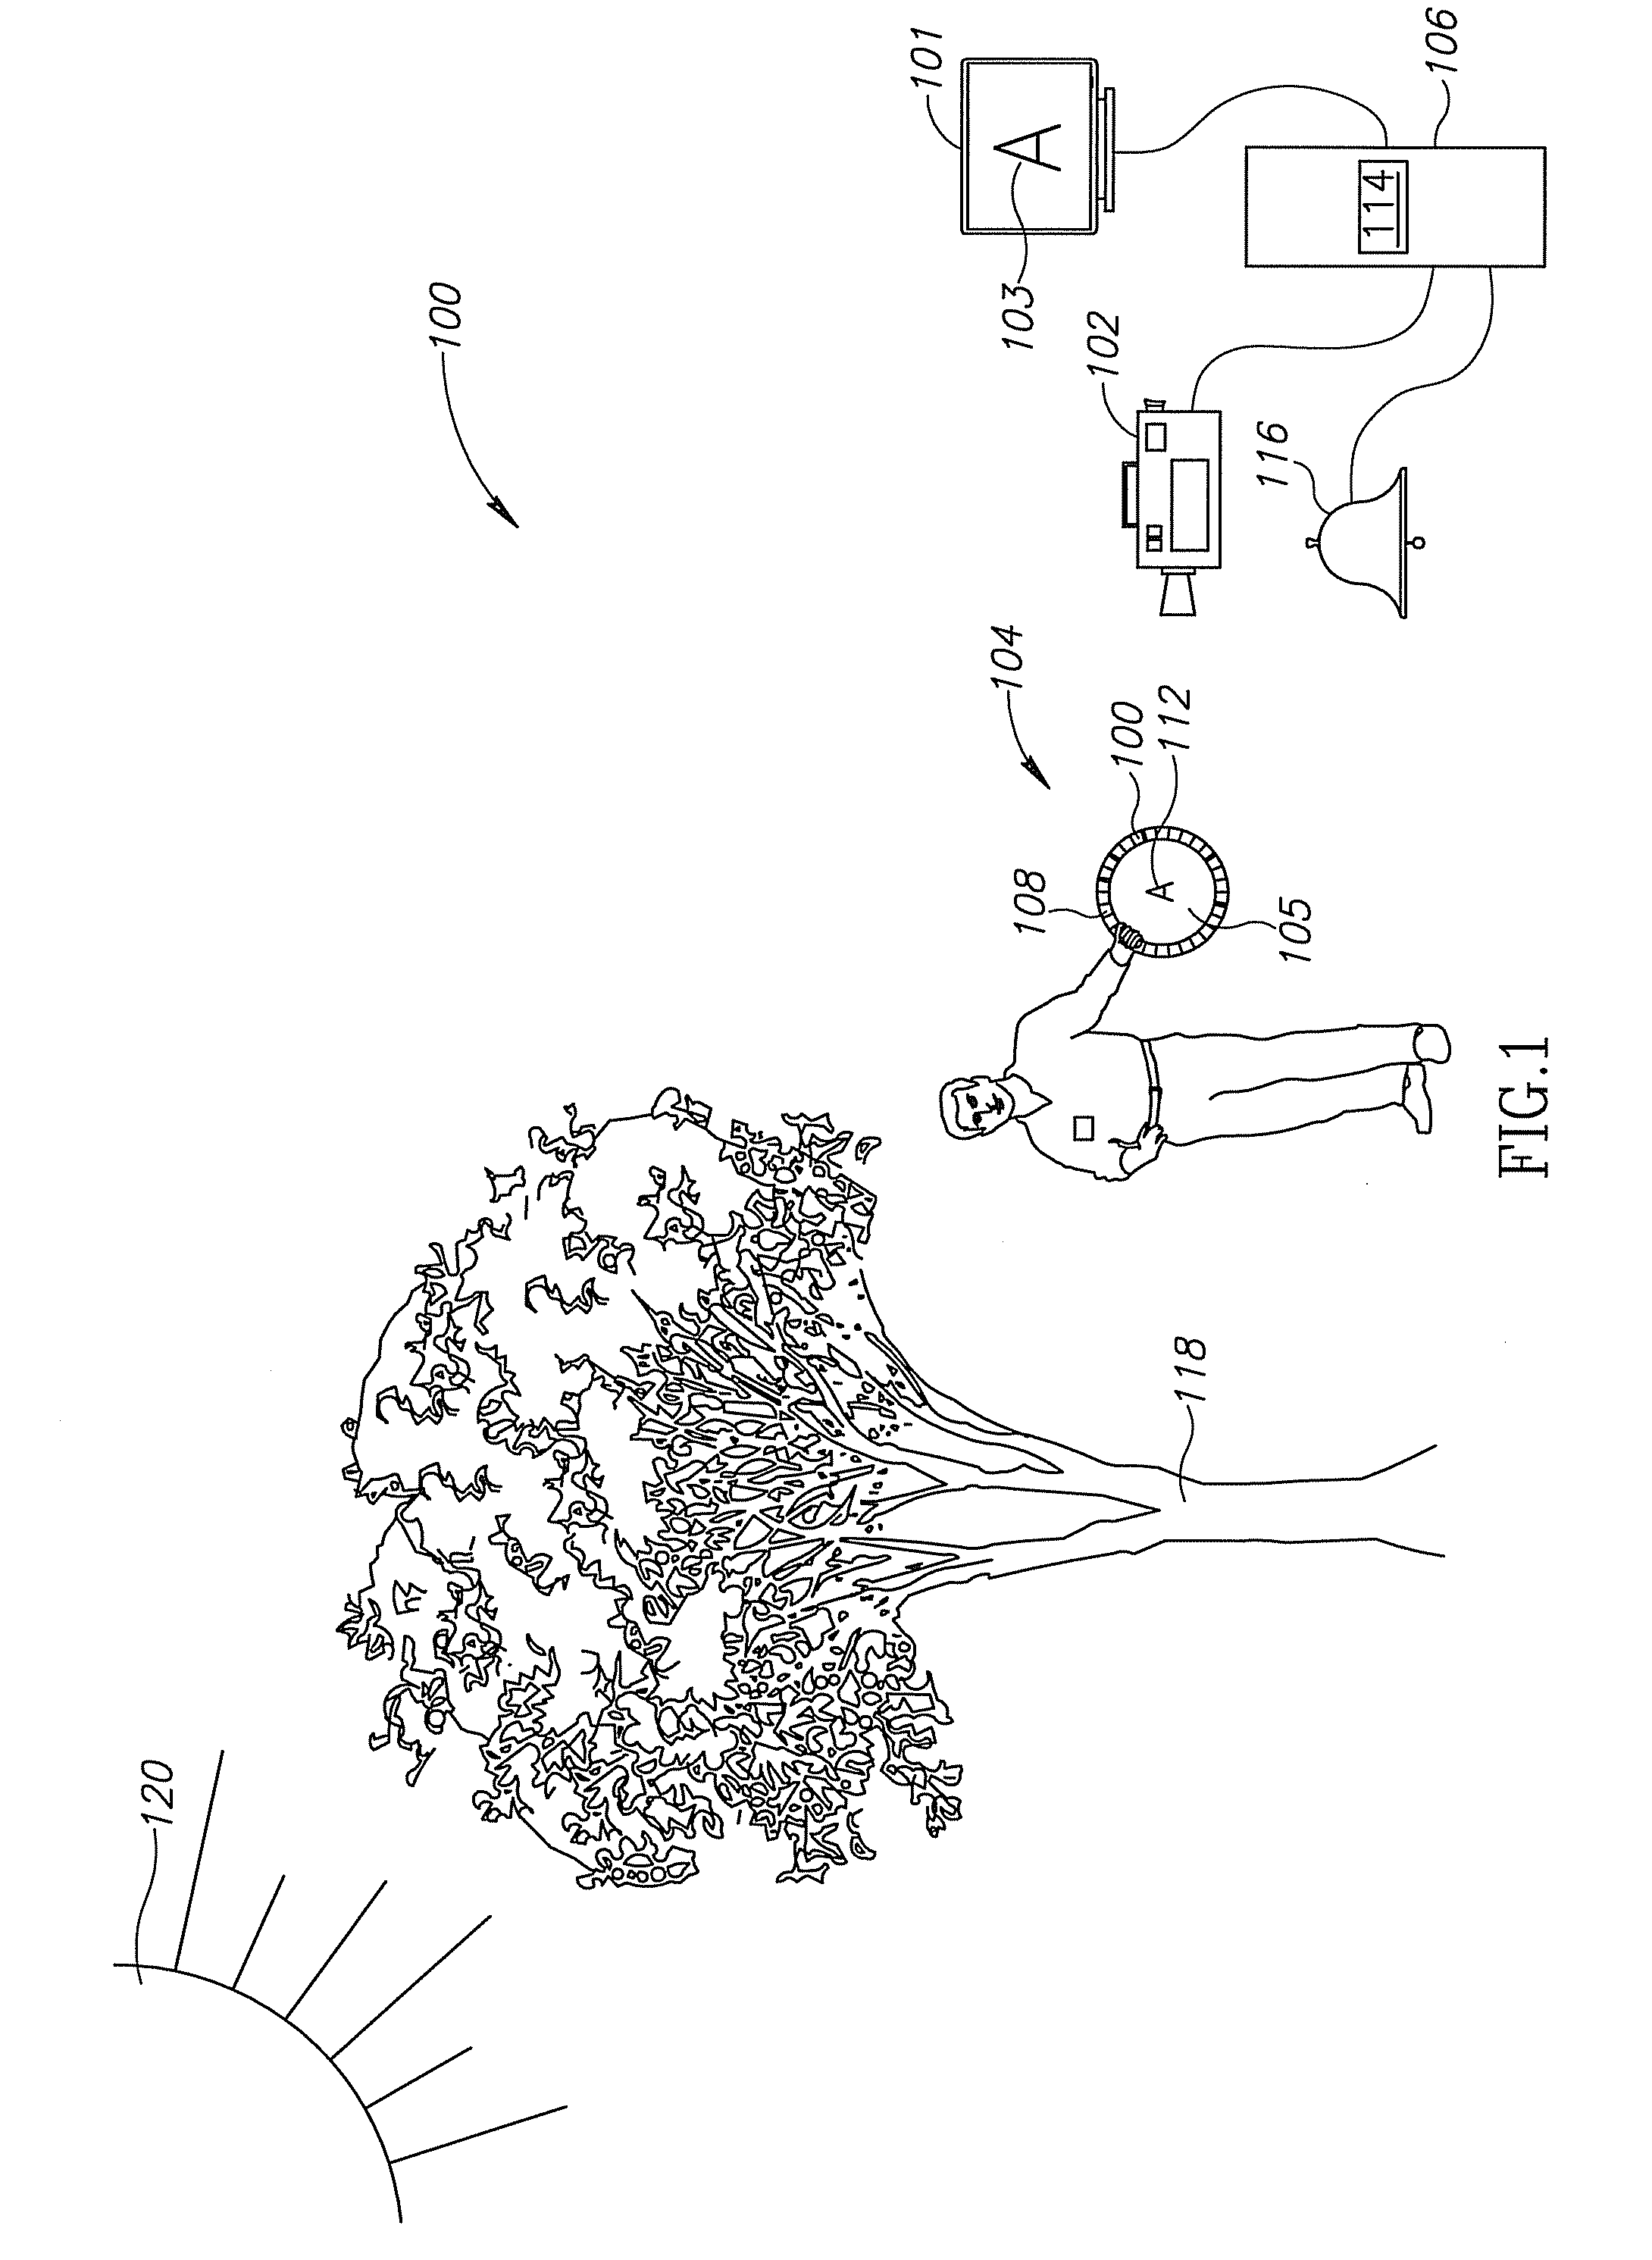 Device and method for identification of objects using color coding